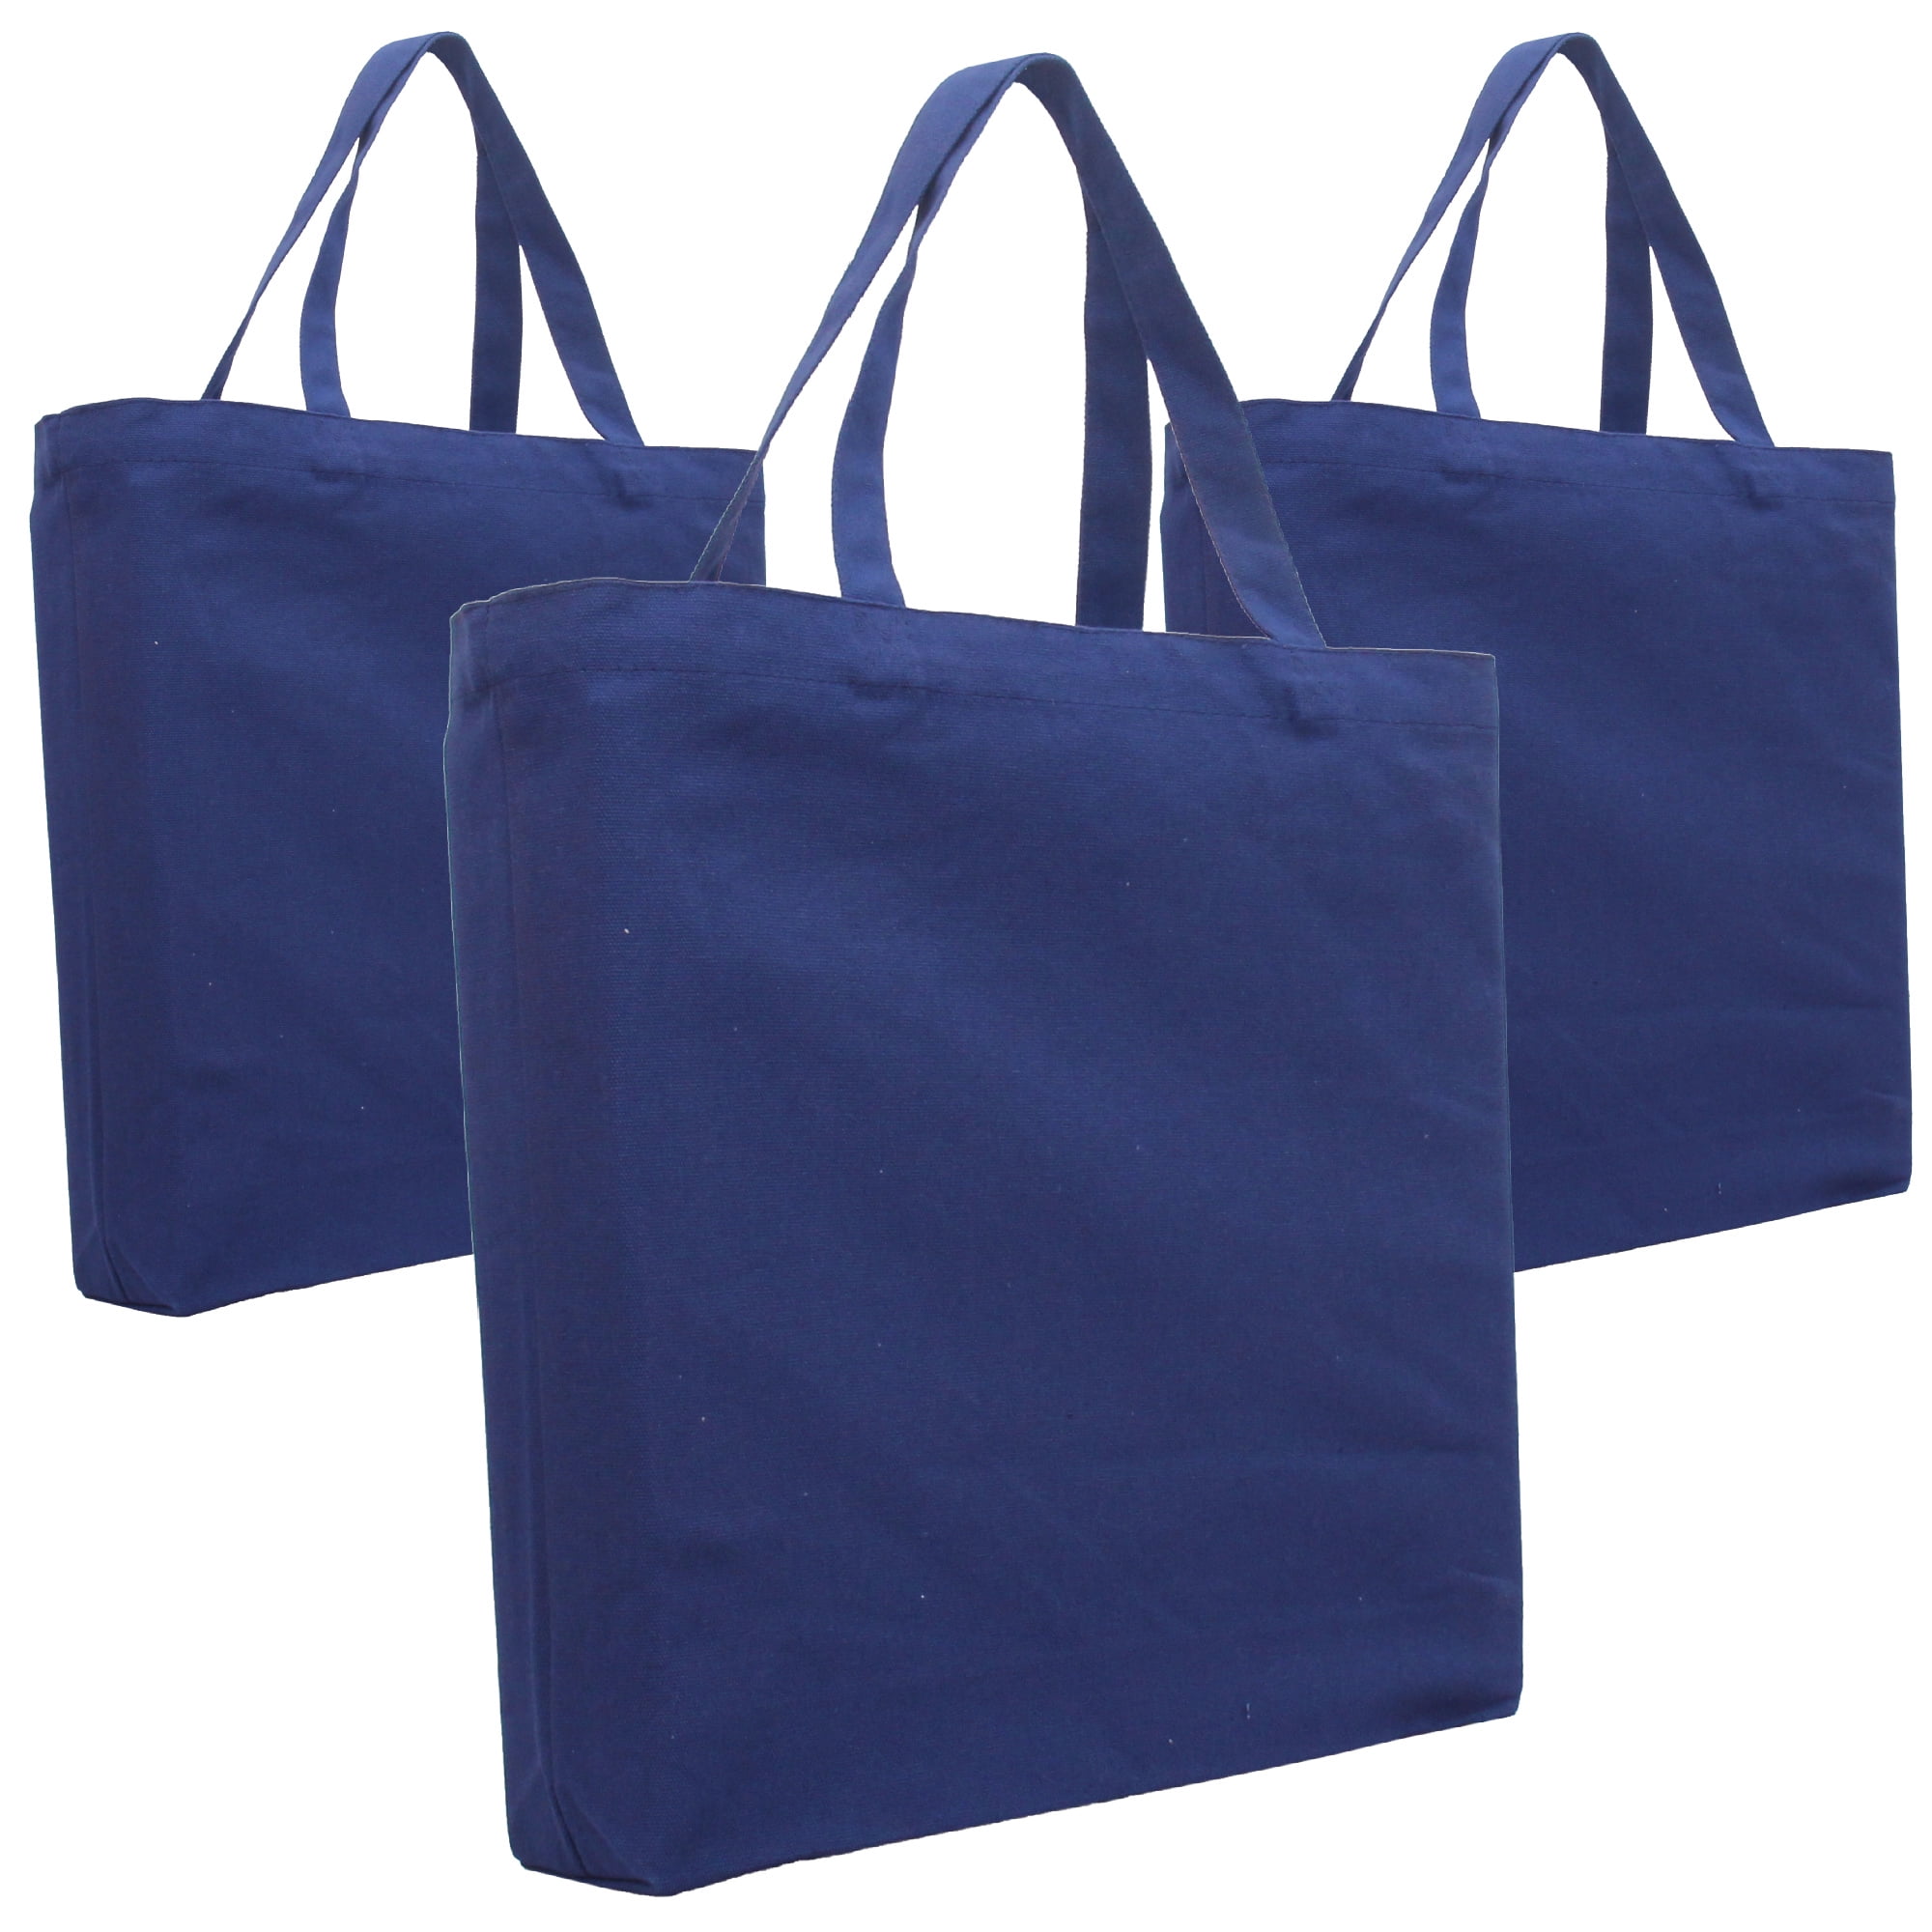 Premium Canvas Tote Bags | Pack of 3 | Heavy Duty 100% Cotton With Strong  Handles Holds up to 40lbs | Eco Friendly | Large Size 14.5x17x3 - Navy